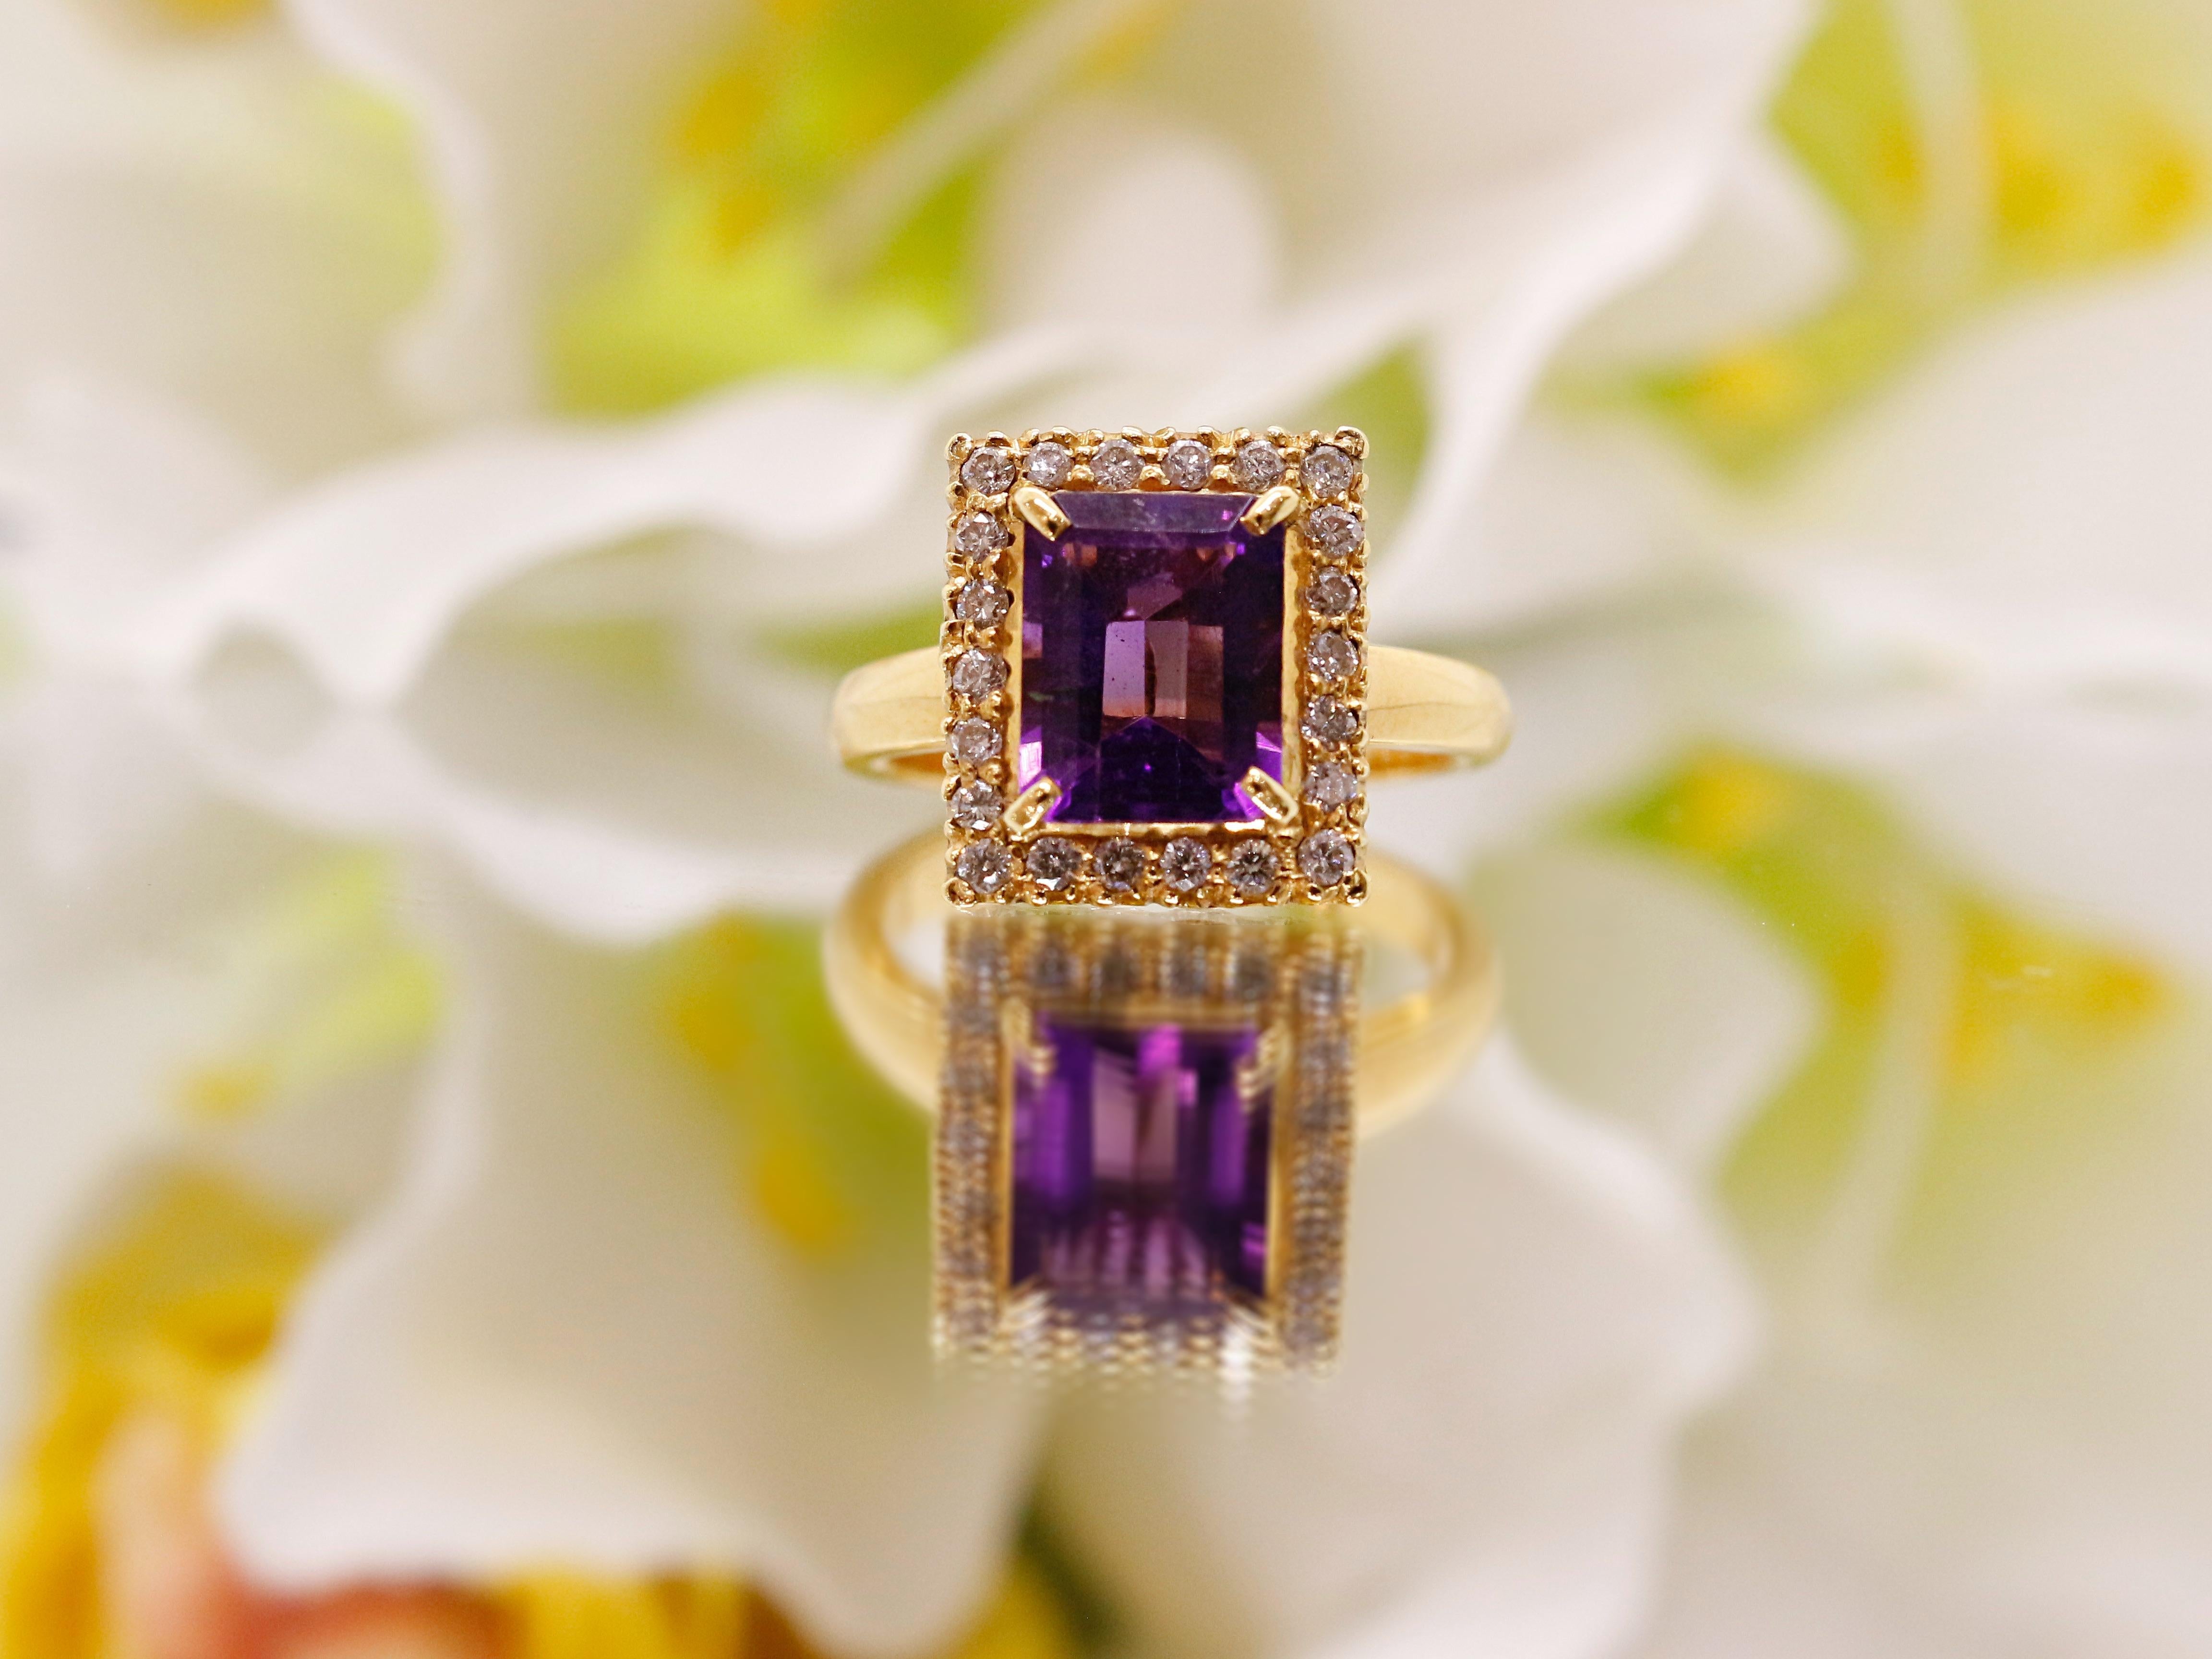 ◆Solid 14kt Gold(shown in picture)

◆Amethyst Weight: 5 CT

◆Diamond Carat: 0.19 CT

◆Diamond Shape: Round mixed

◆Total Weight: 6.6 Gram